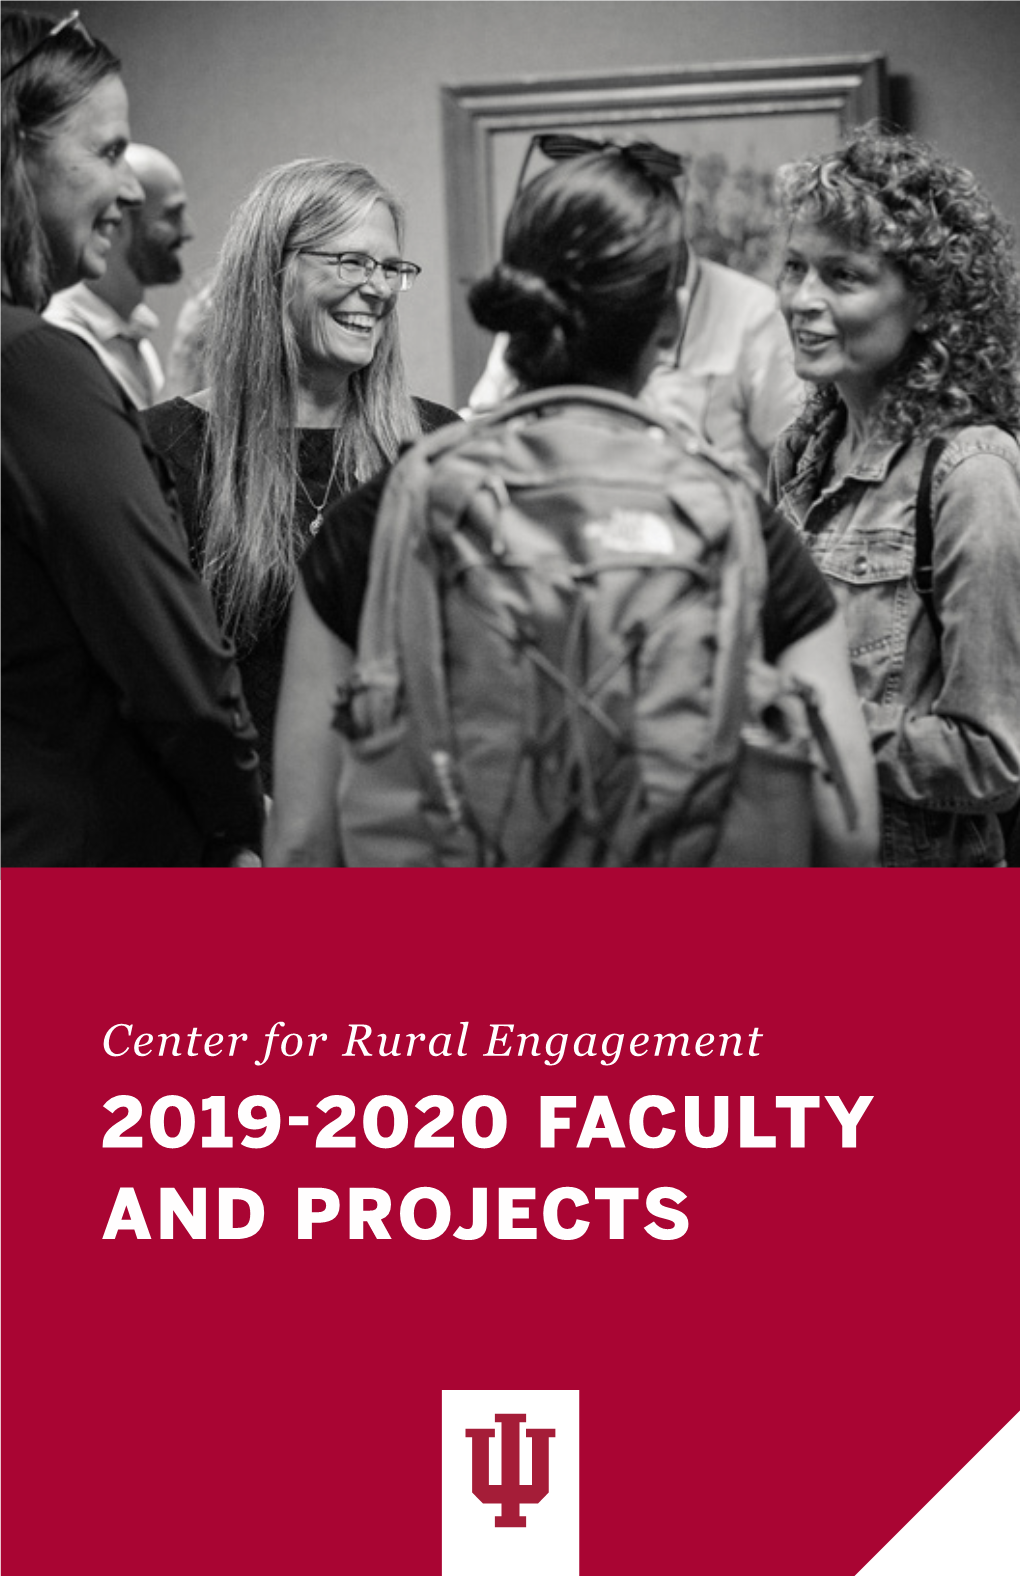 2019-2020 Faculty and Projects